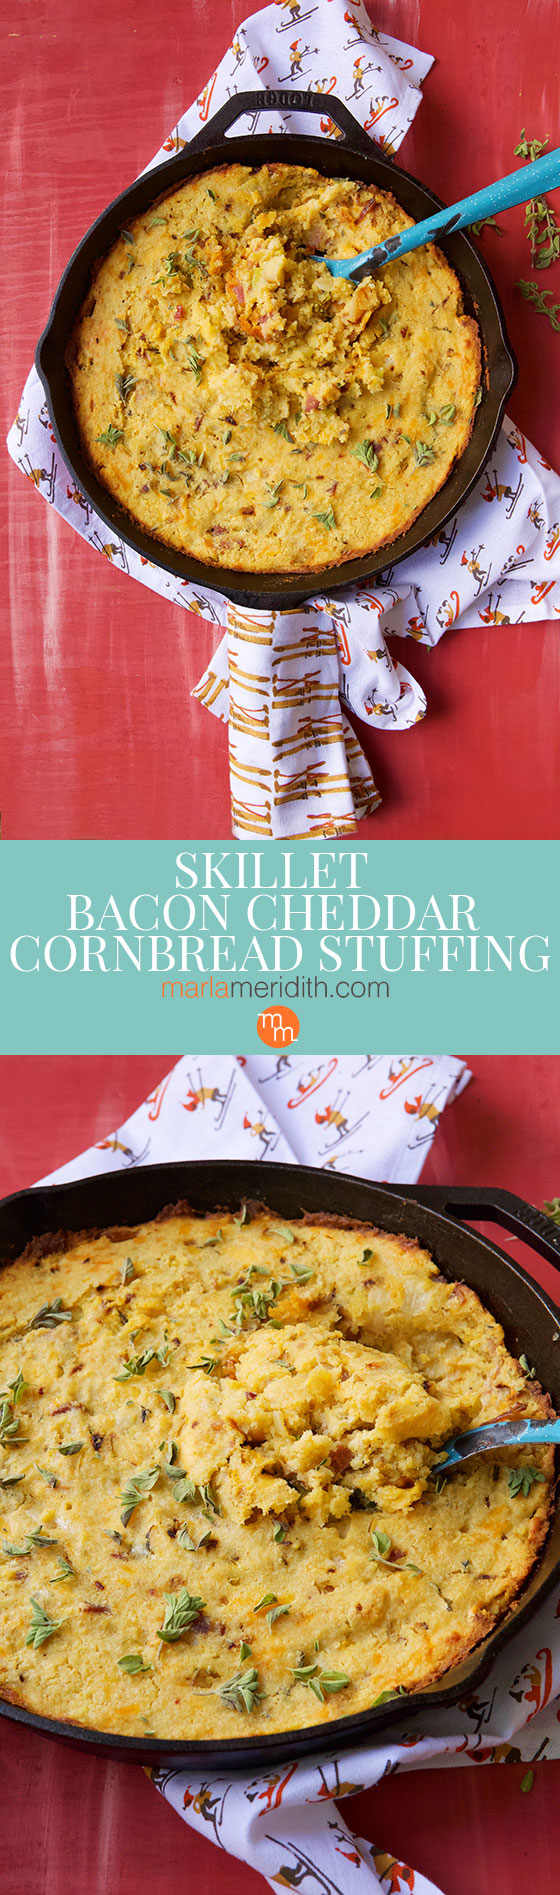 Make this delicious Skillet Bacon Cheddar Cornbread Stuffing recipe for the holidays. Bet this side dish is gone before any other on the table! MarlaMeridith.com